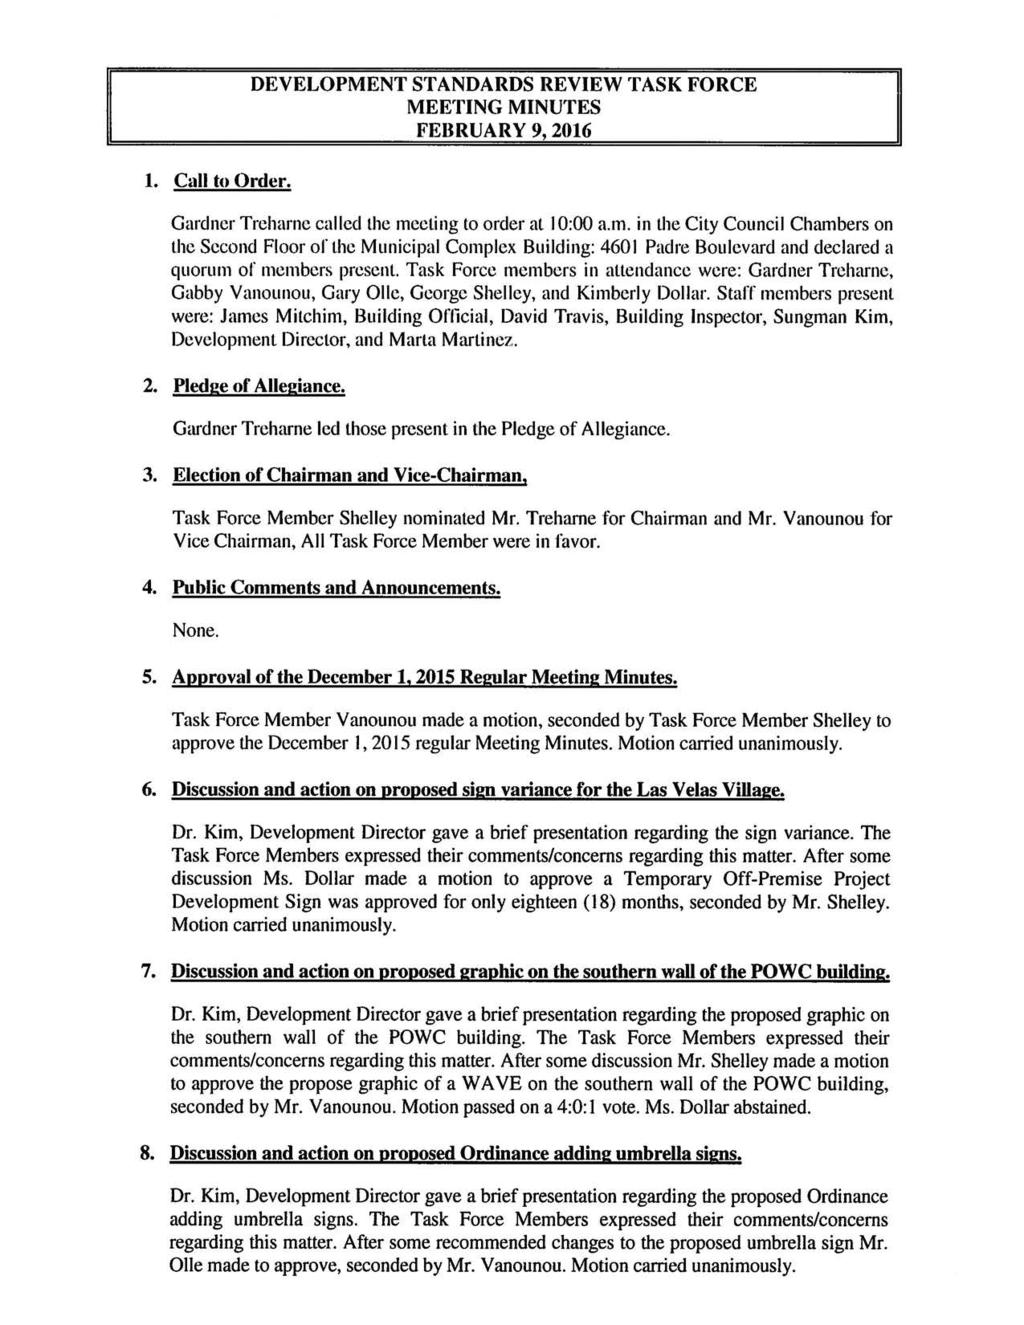 1. Call to Order. DEVELOPMENT STANDARDS REVIEW TASK FORCE MEETING MINUTES FEBRUARY 9, 2016 Gardner Treharne called the me